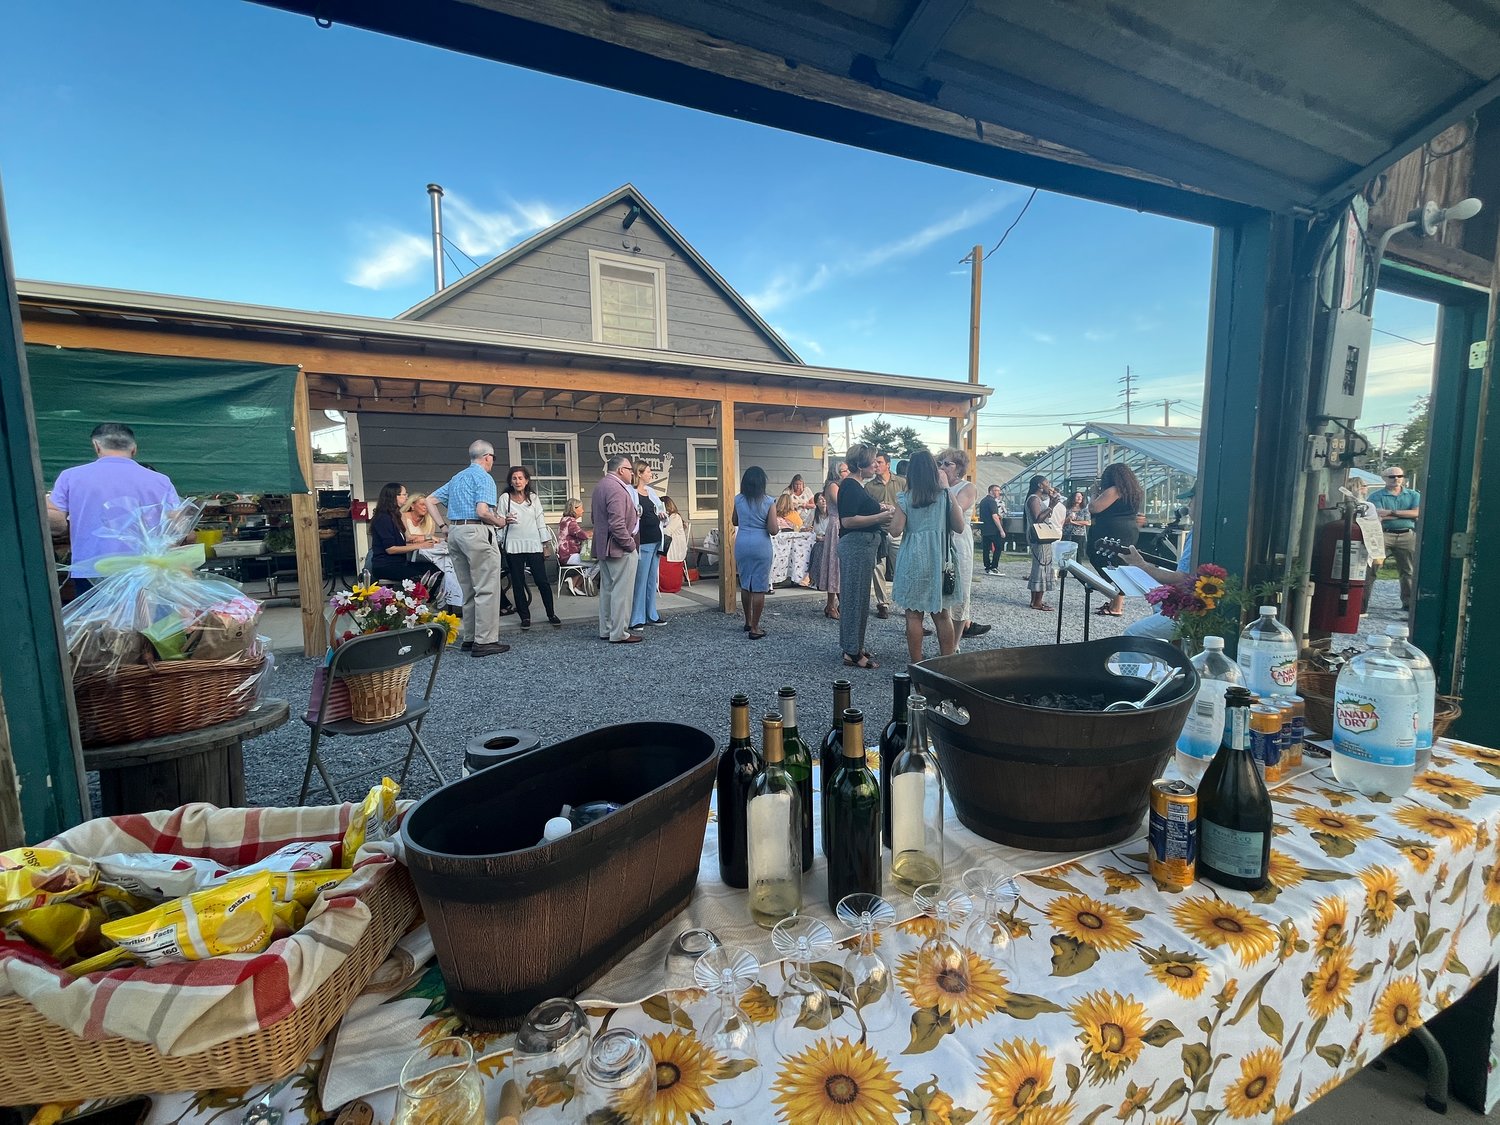 Attendees sampleD drinks and farm fresh appetizers at the annual farm to table benefit dinner at Crossroads Farm at Grossman’s on Sept. 10. The vast majority of ingredients used in preparing the dinner came straight from the farm’s fields.